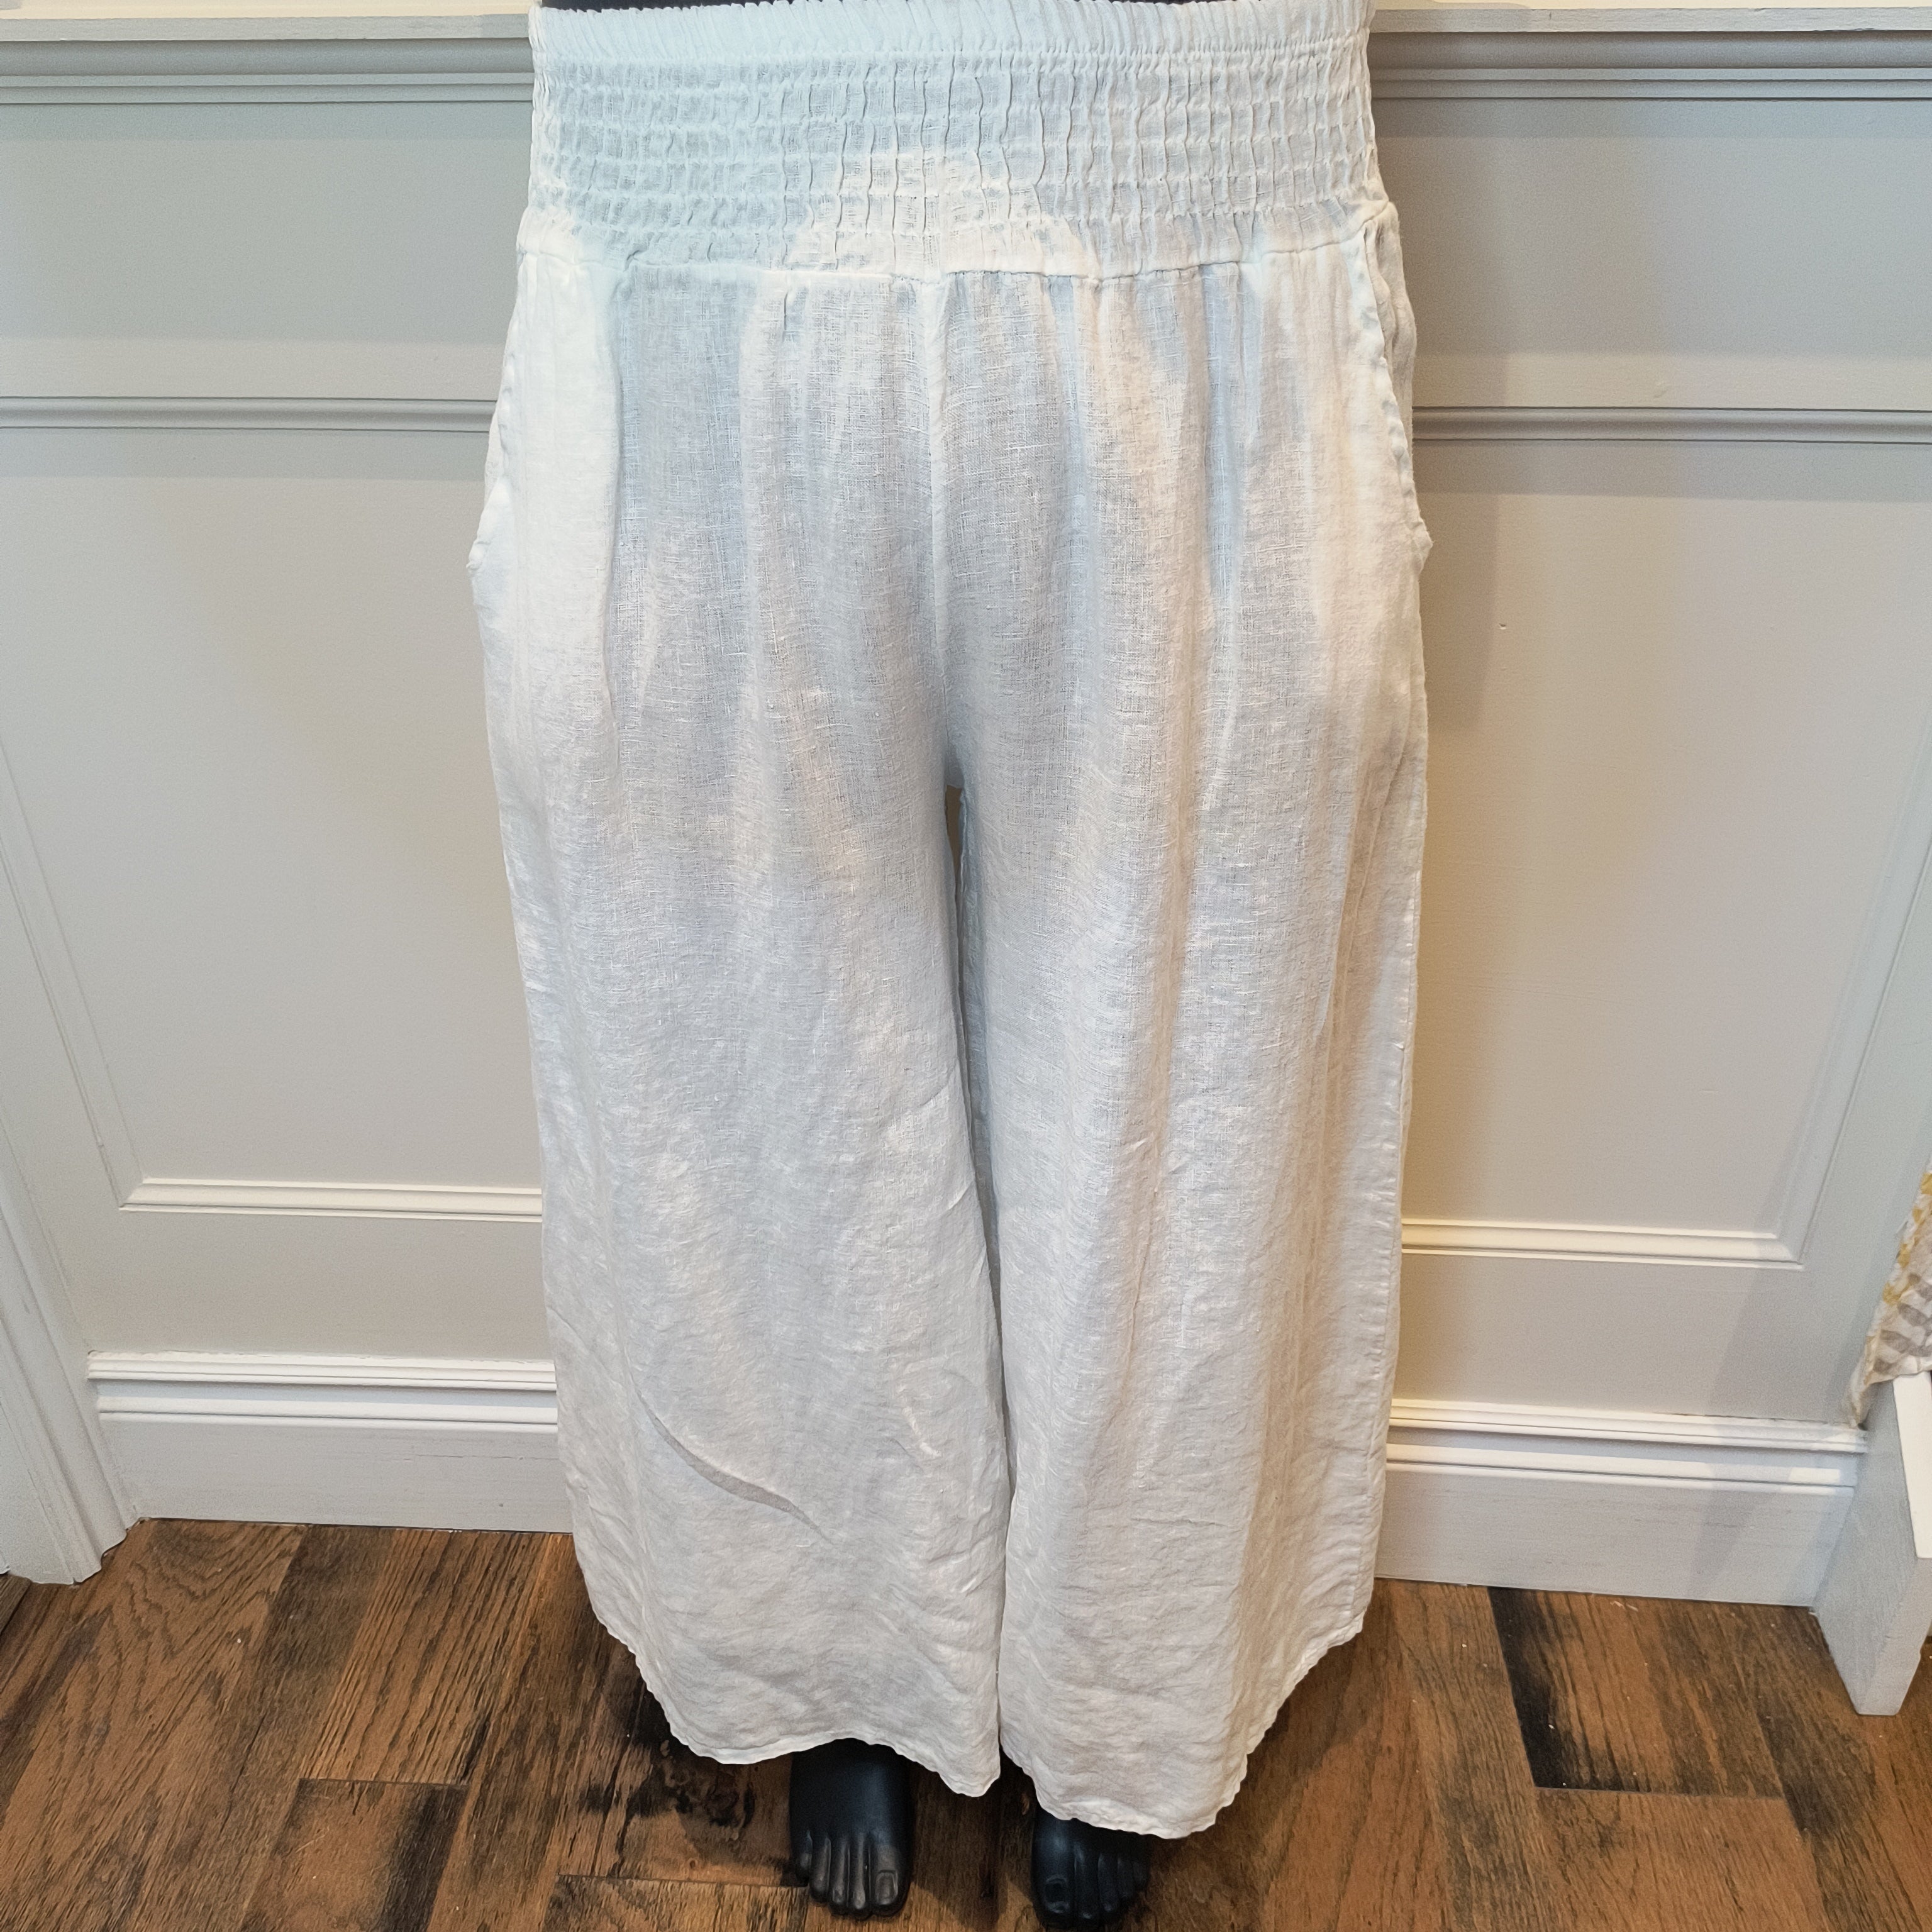 Plum loco made in Italy linen Palazzo pant